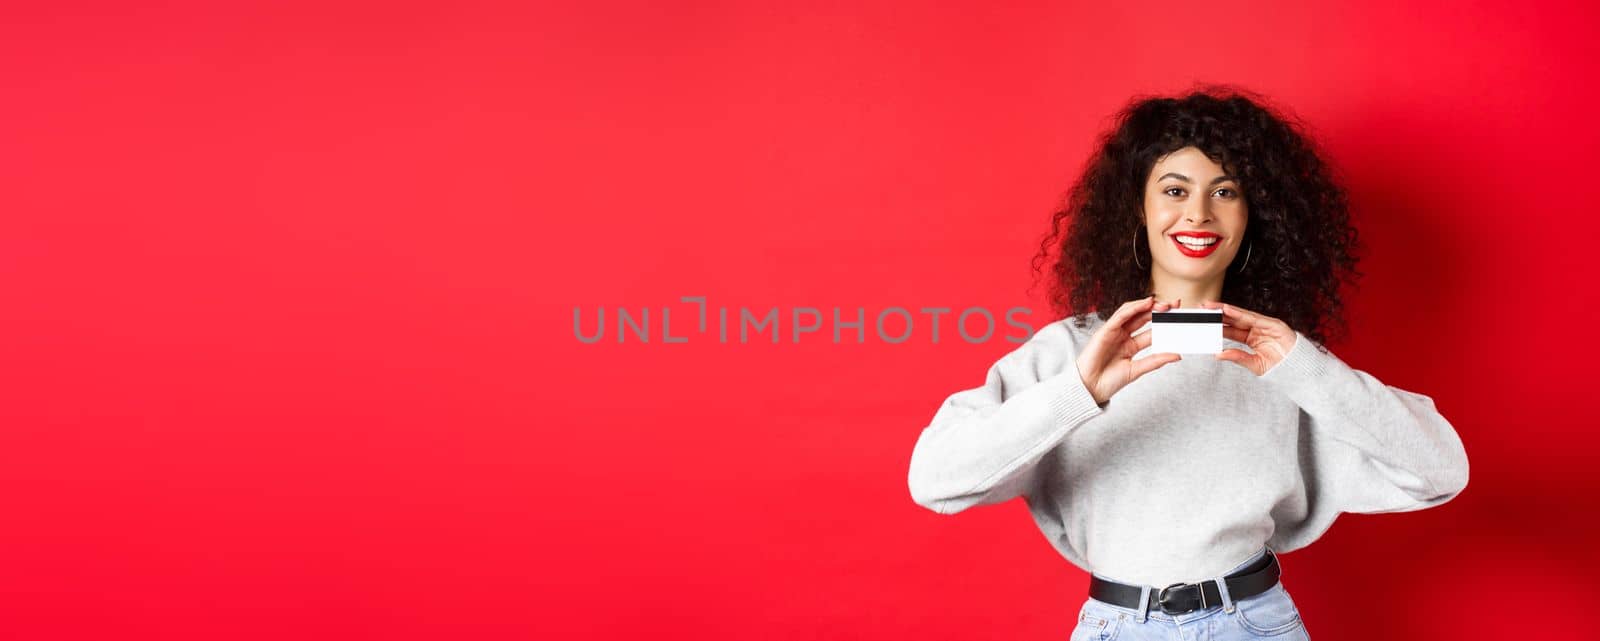 Happy lady with curly hair showing plastic credit card and smiling, standing against red background. Shopping concept by Benzoix